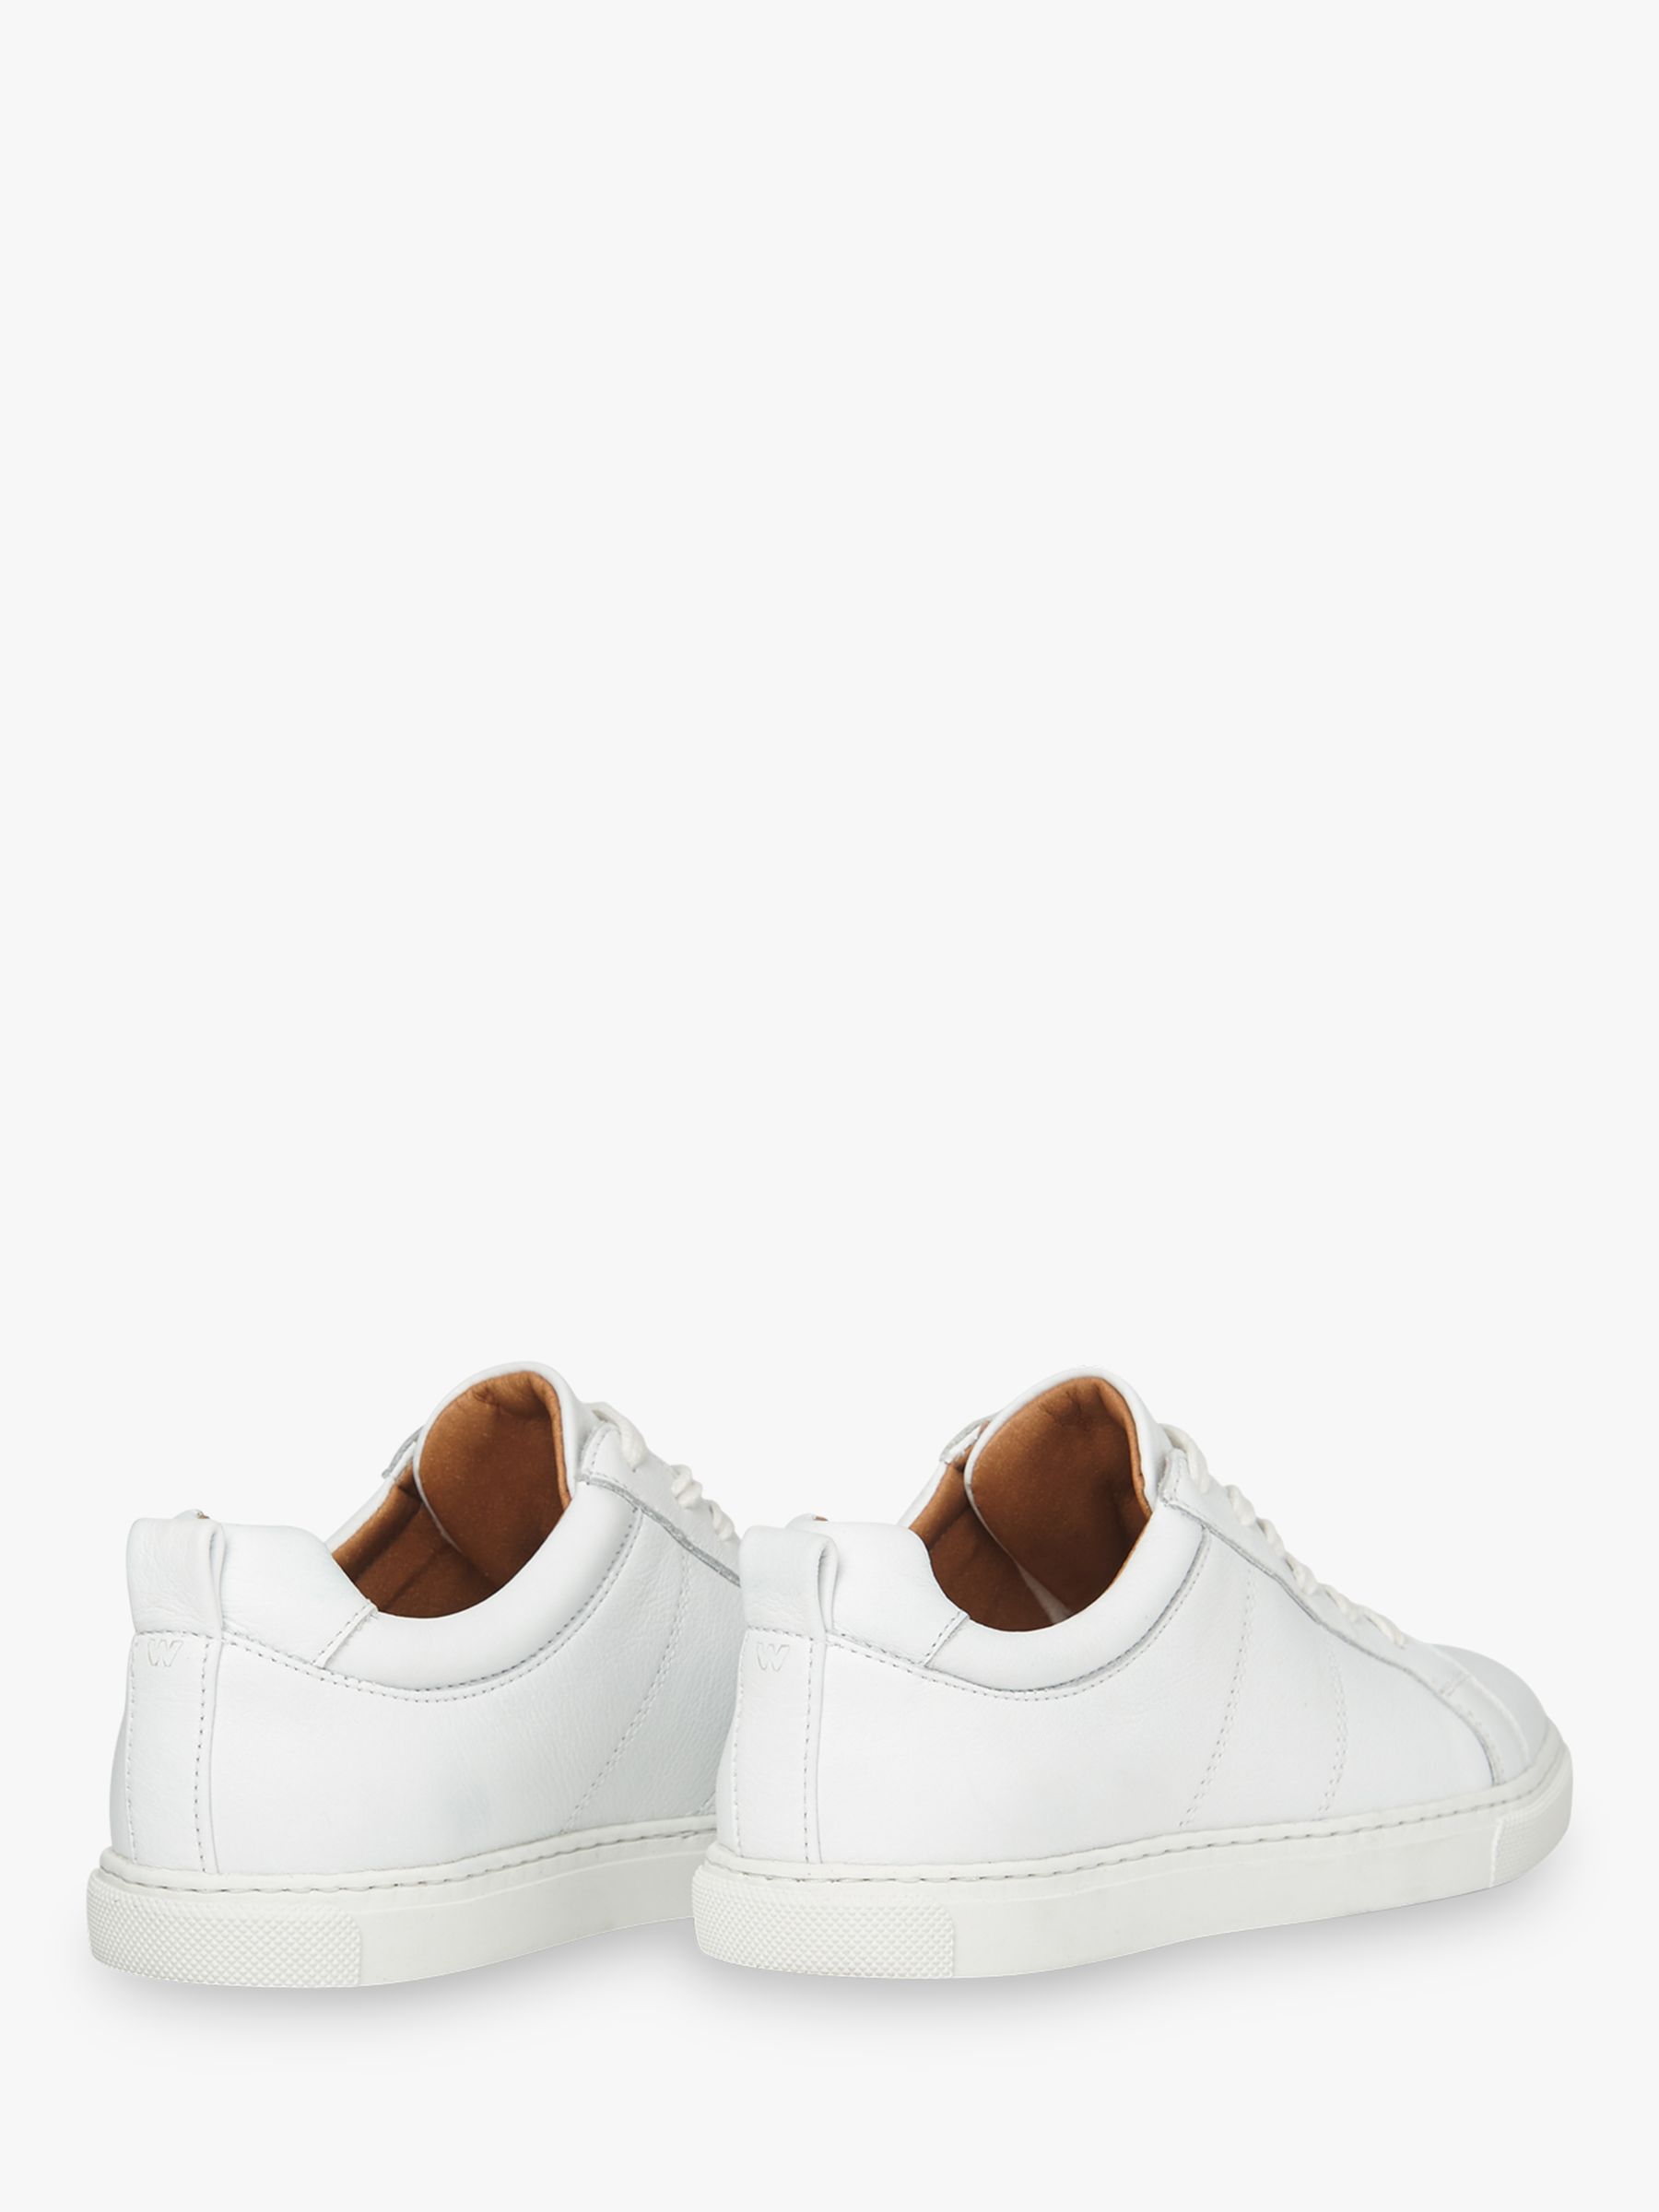 Buy Whistles Koki Lace Up Leather Trainers, White Online at johnlewis.com